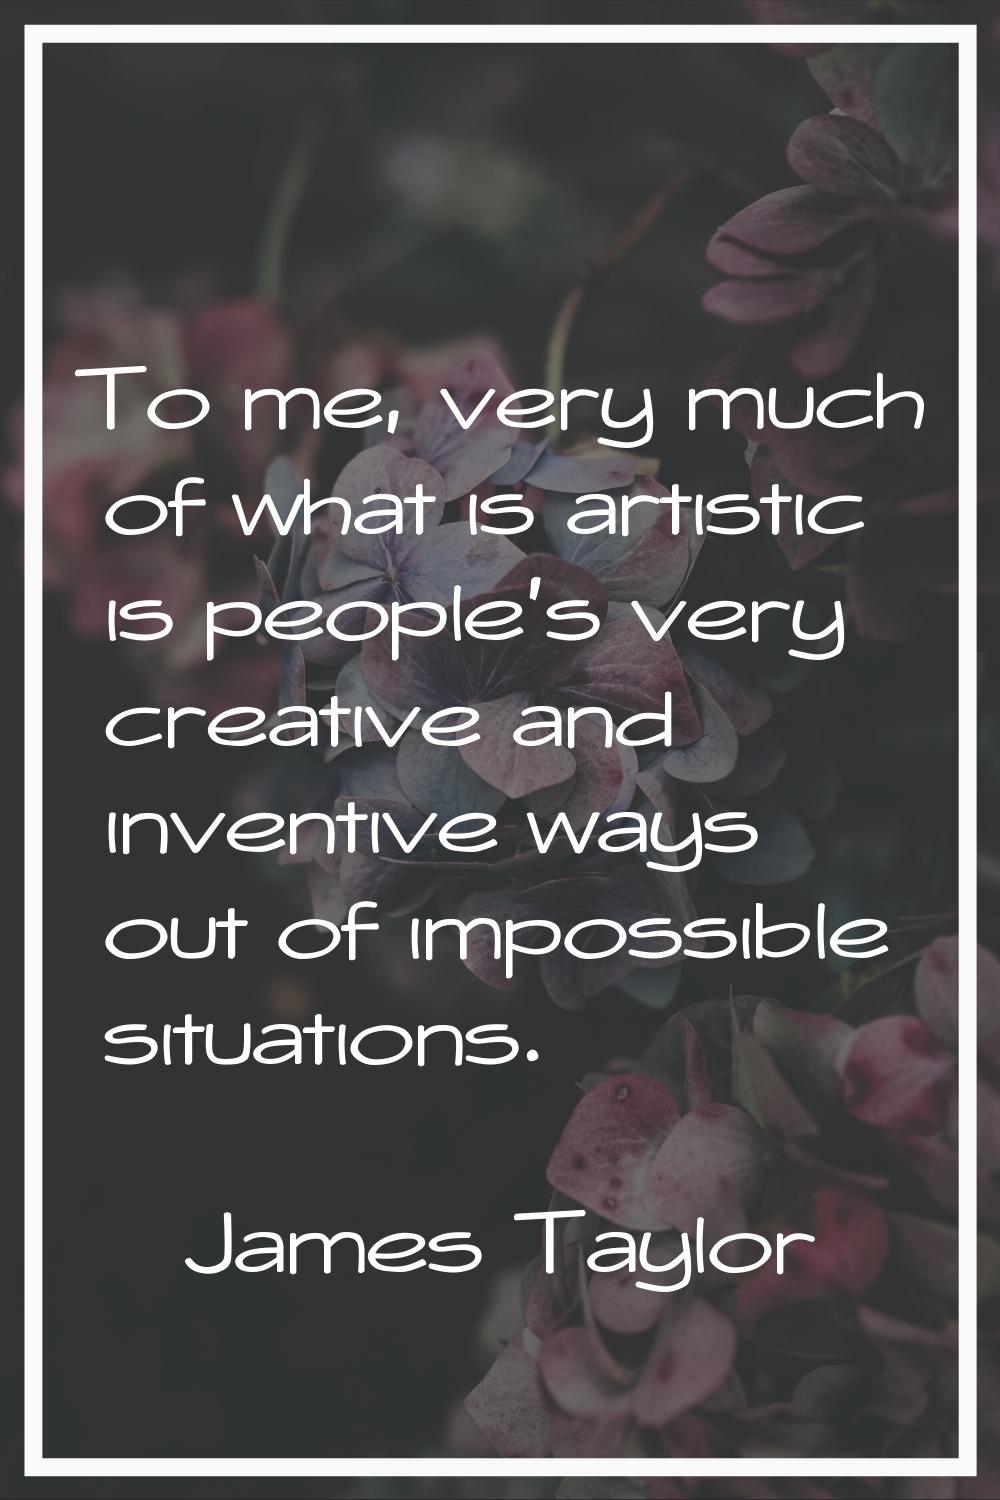 To me, very much of what is artistic is people's very creative and inventive ways out of impossible